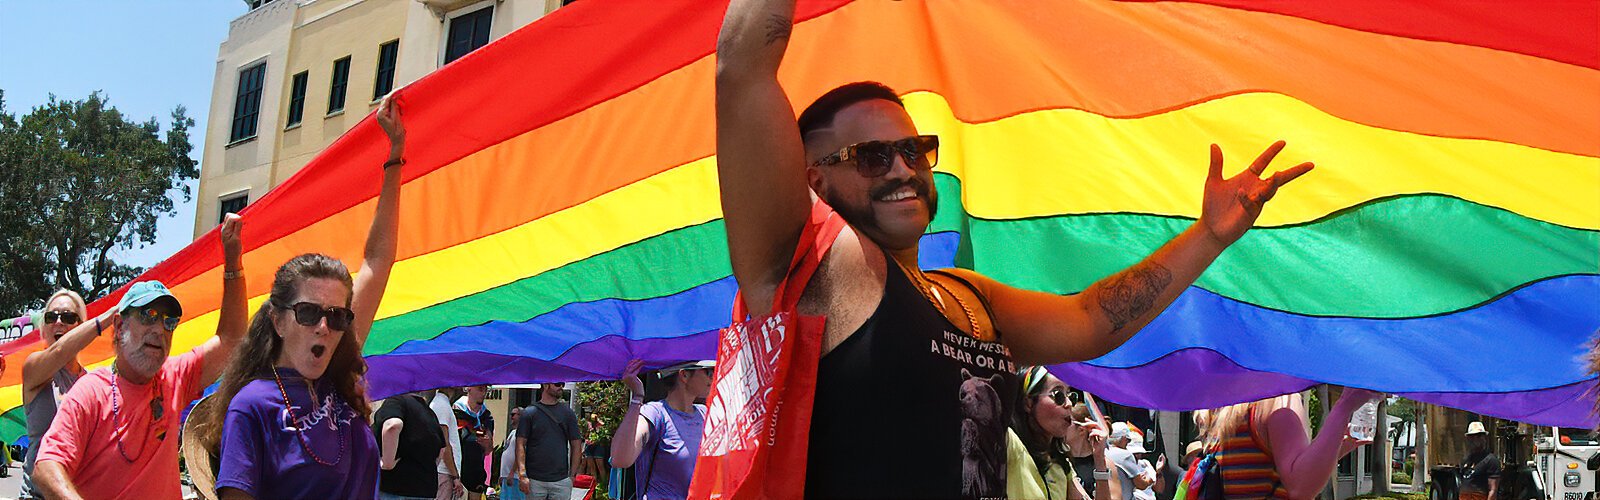 Capping off  Pride Month events, the annual St. Pete Pride street festival drew a large crowd to the Grand Central District despite sweltering temperatures.